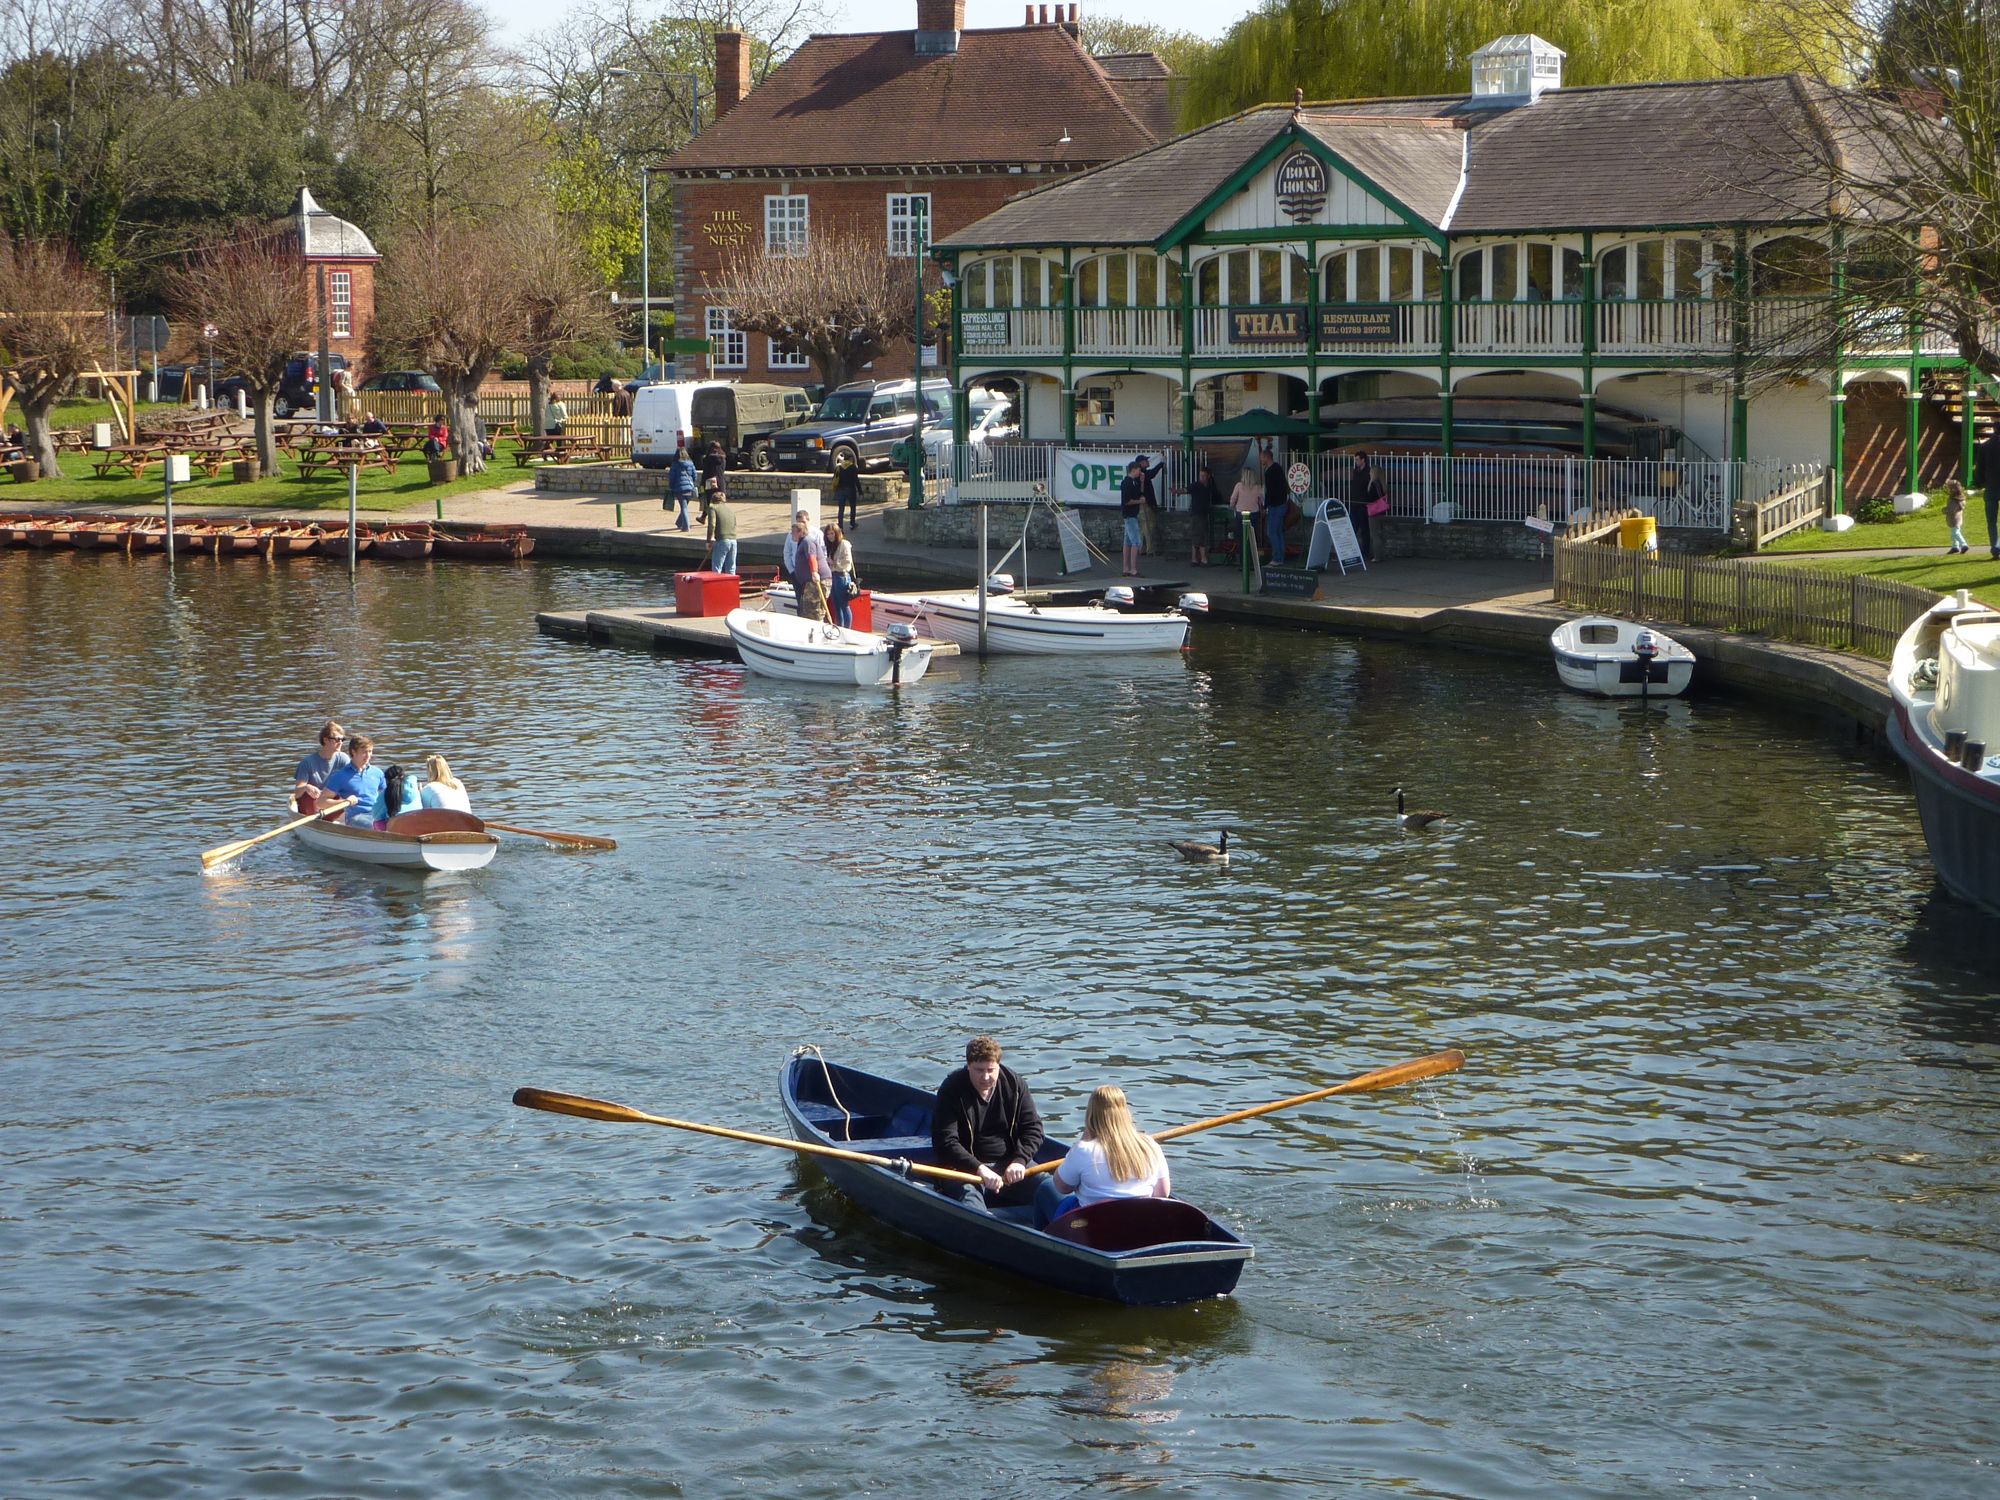 canal boat trips in stratford upon avon